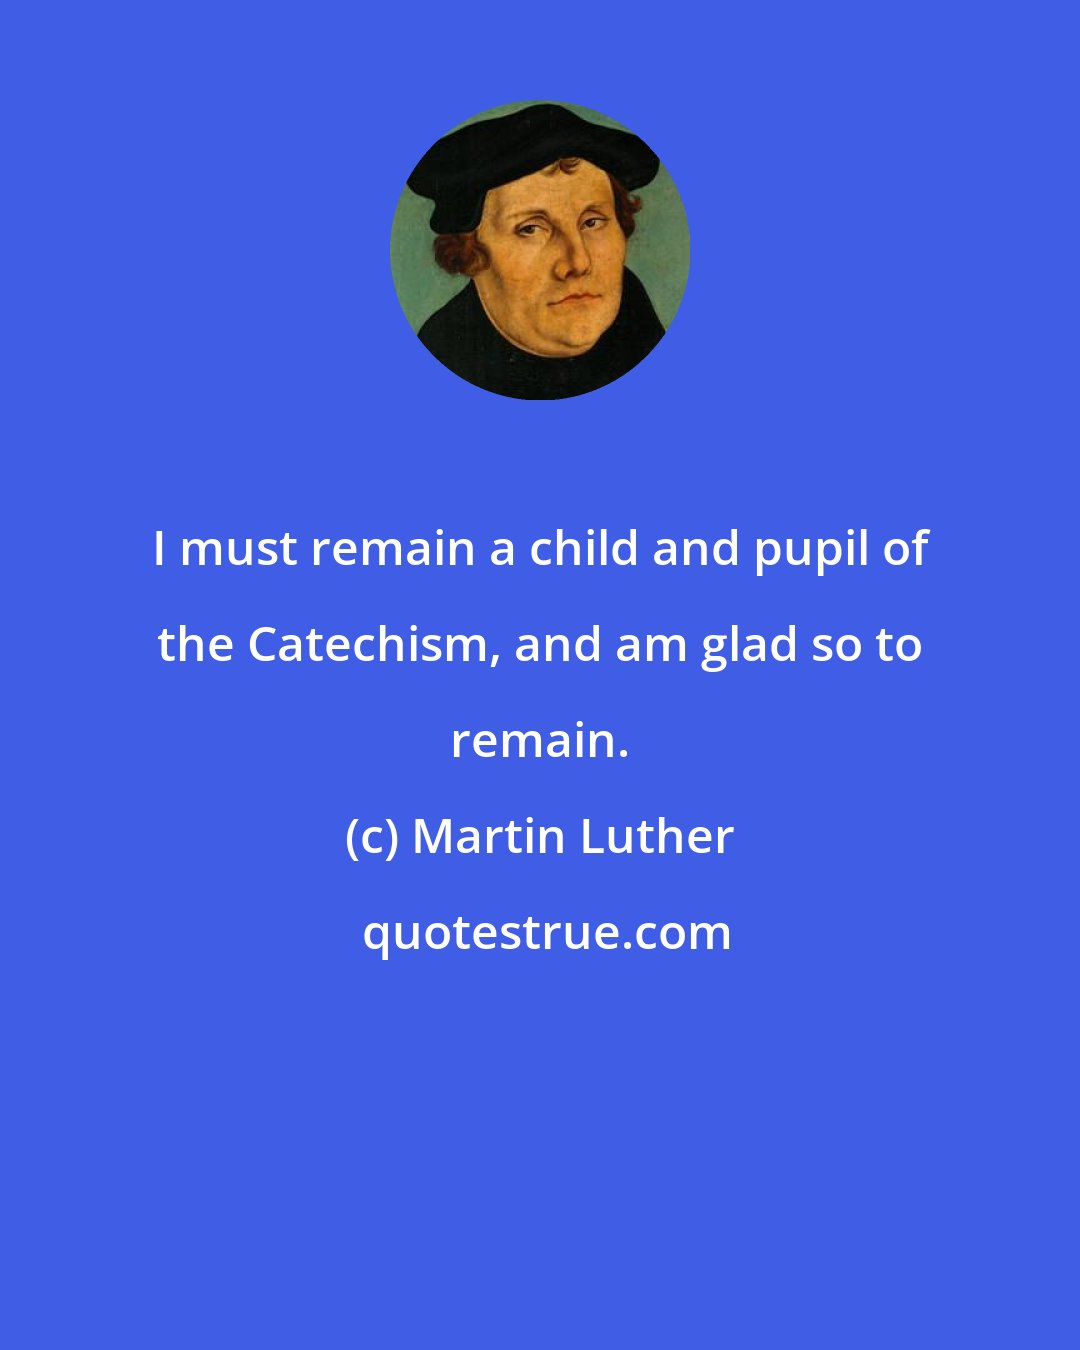 Martin Luther: I must remain a child and pupil of the Catechism, and am glad so to remain.